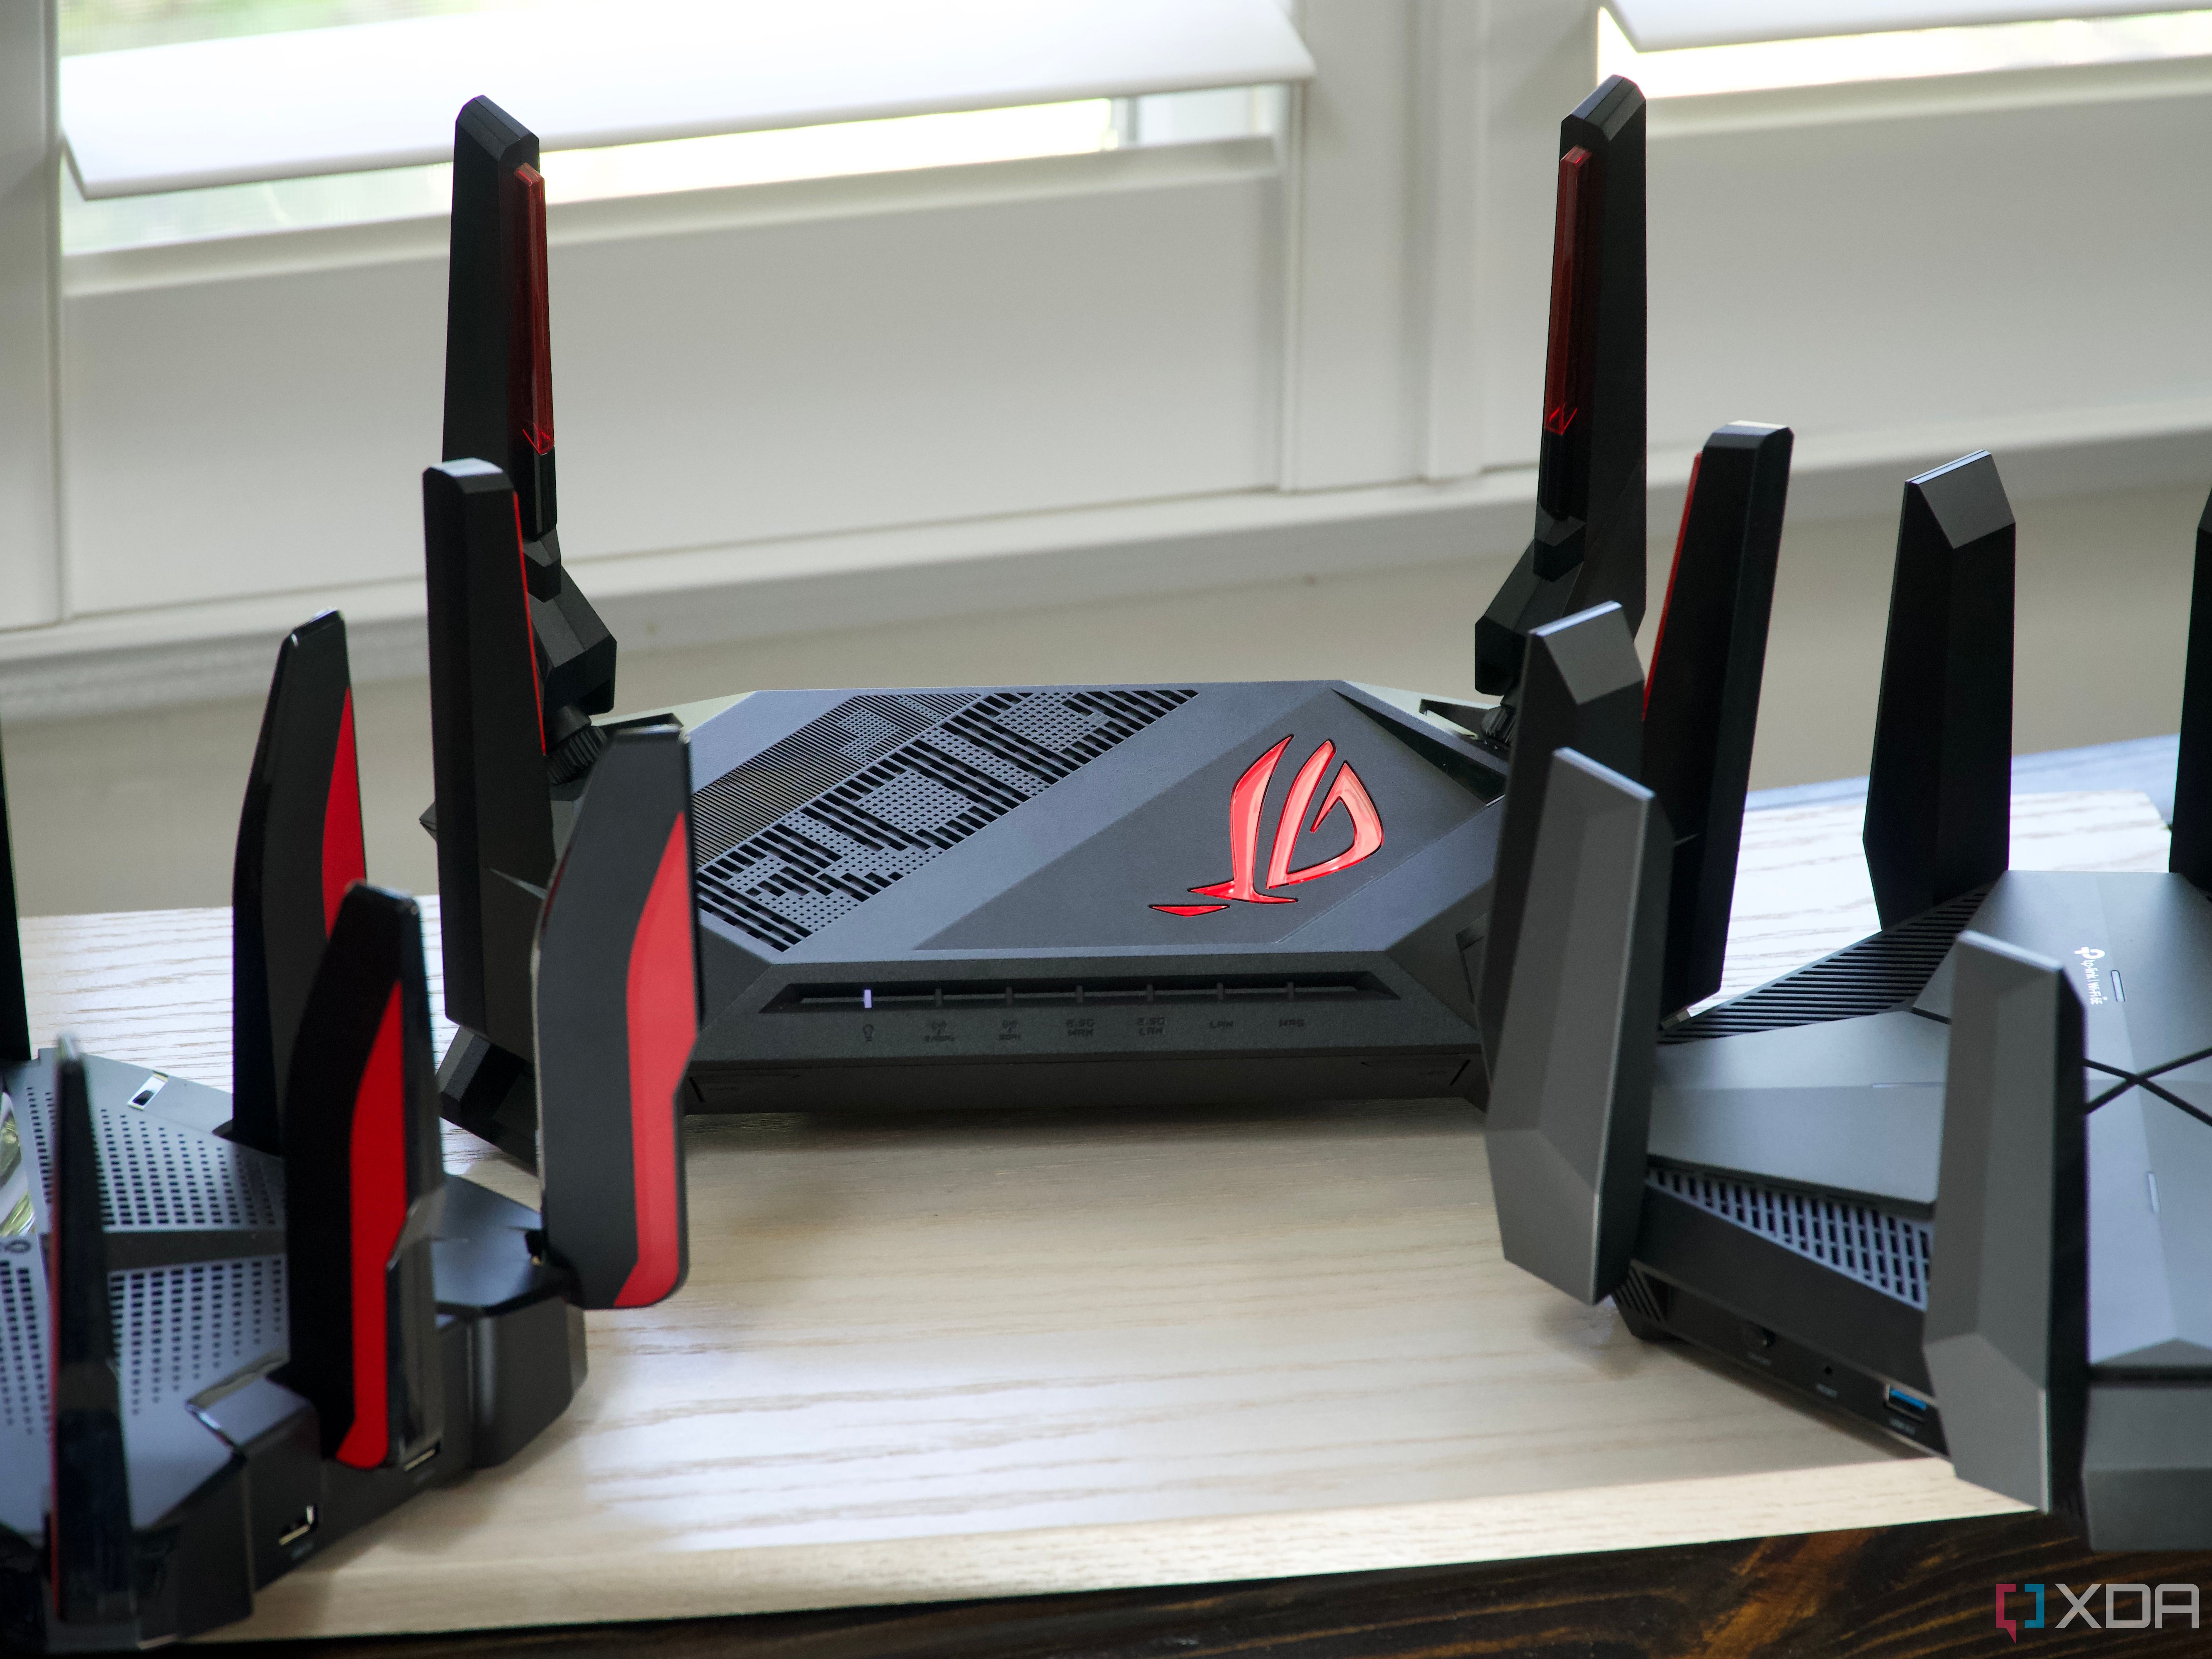 ASUS ROG Rapture GT-AX6000, TP-Link Archer GX90, and TP-Link Archer AXE300